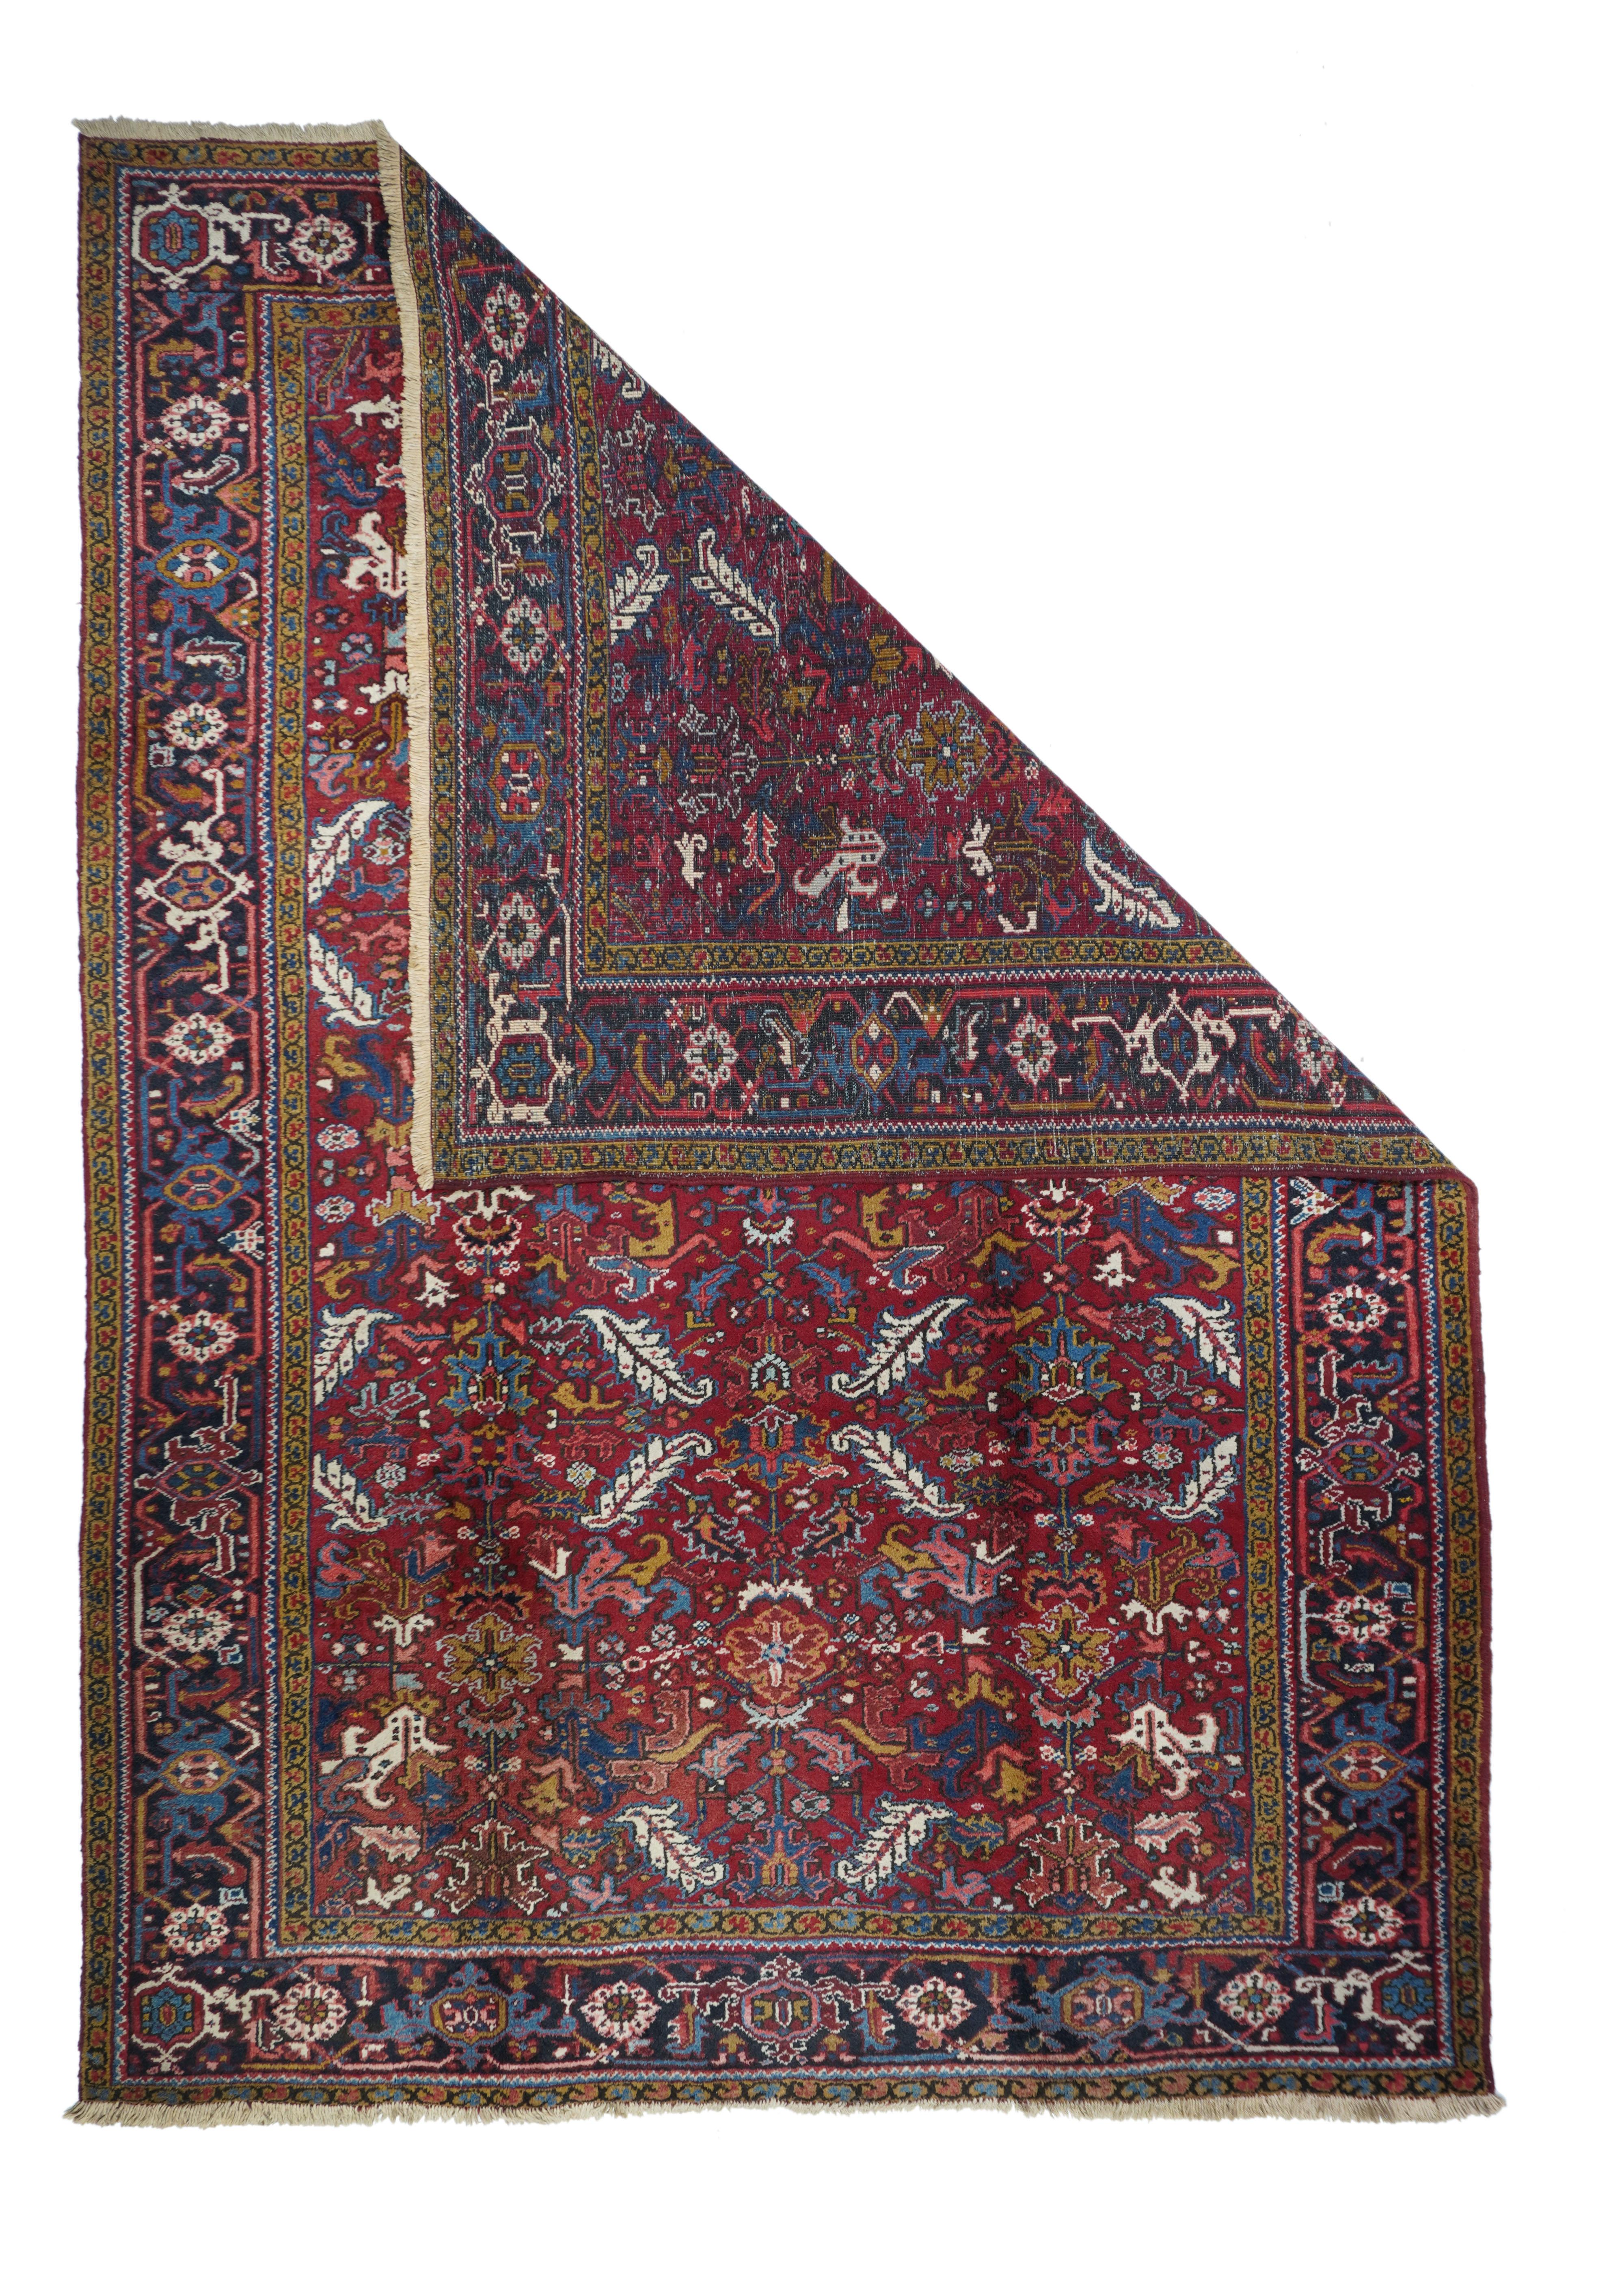 Vintage Heriz rug, measures :8' x 11'2''. Pairs of crisp, veined, curled ecru leaves define the allover pattern of palmettes and poles, accented in green, mustard, burnt salmon and light blue. The elaborately developed reversing turtle border shows